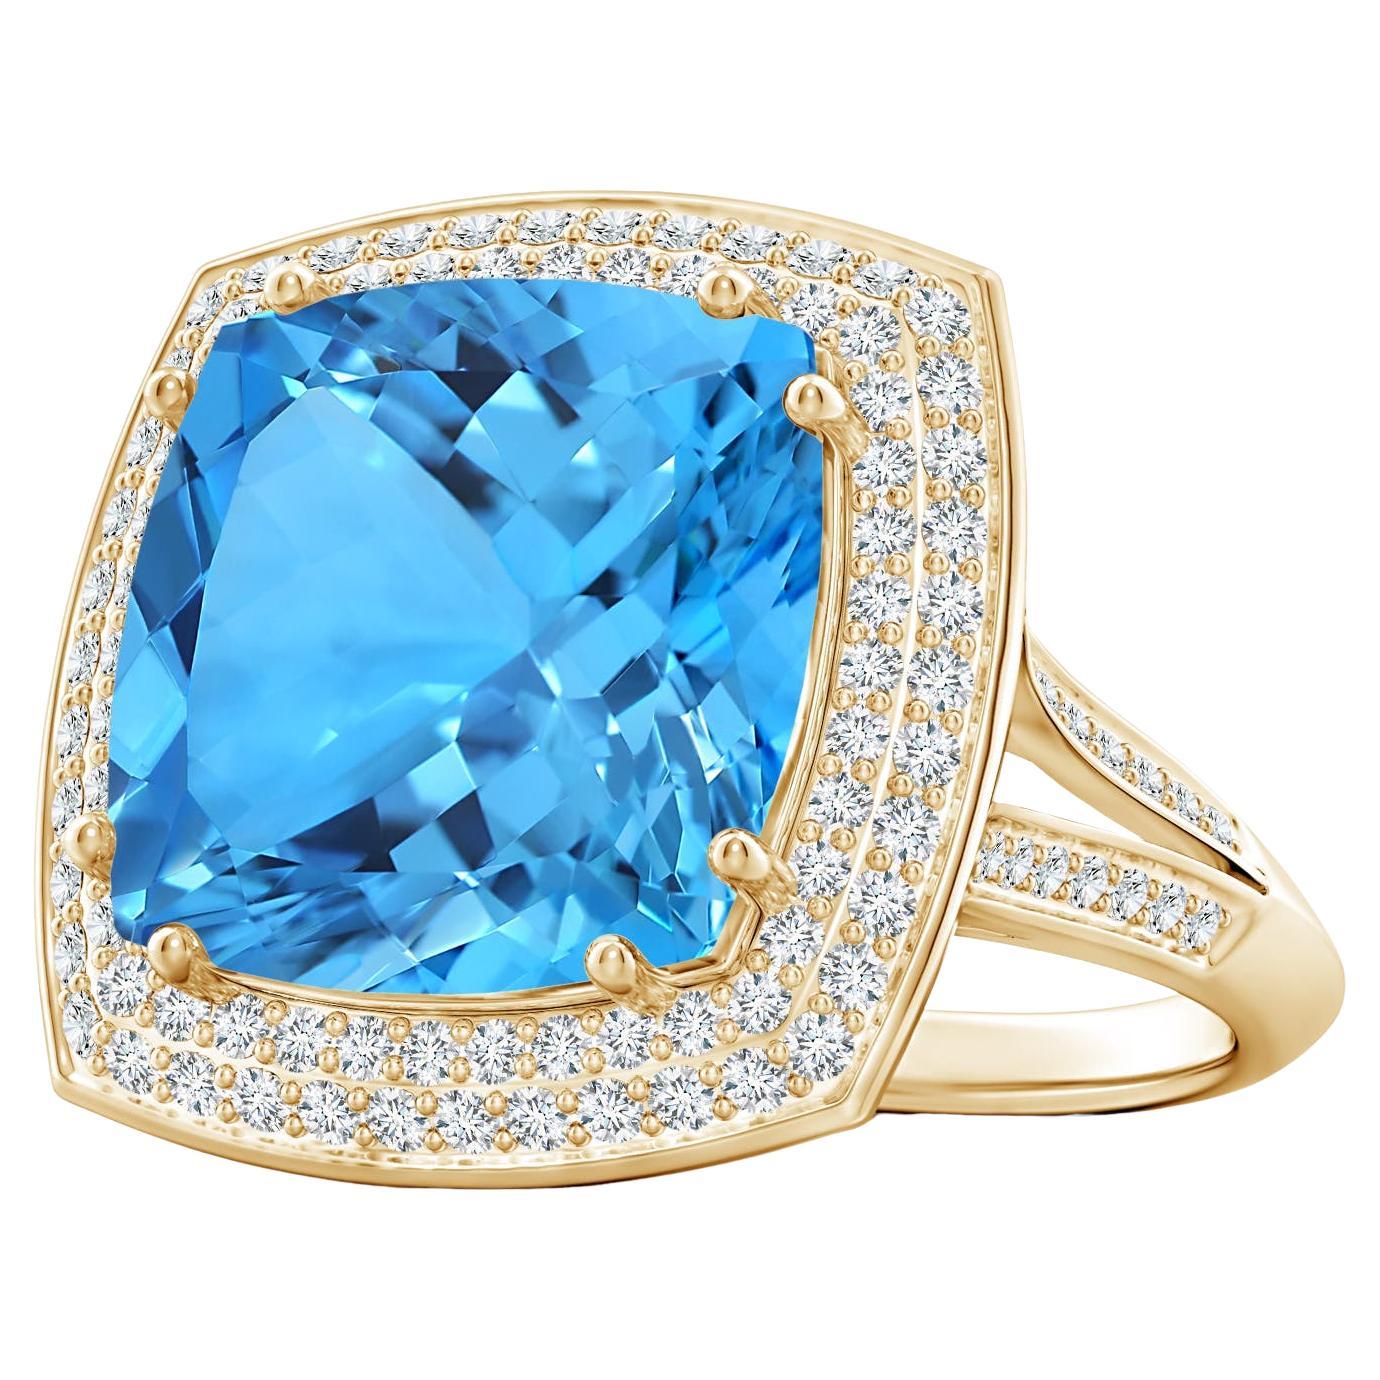 GIA Certified Swiss Blue Topaz Ring in Yellow Gold with Diamond Halo